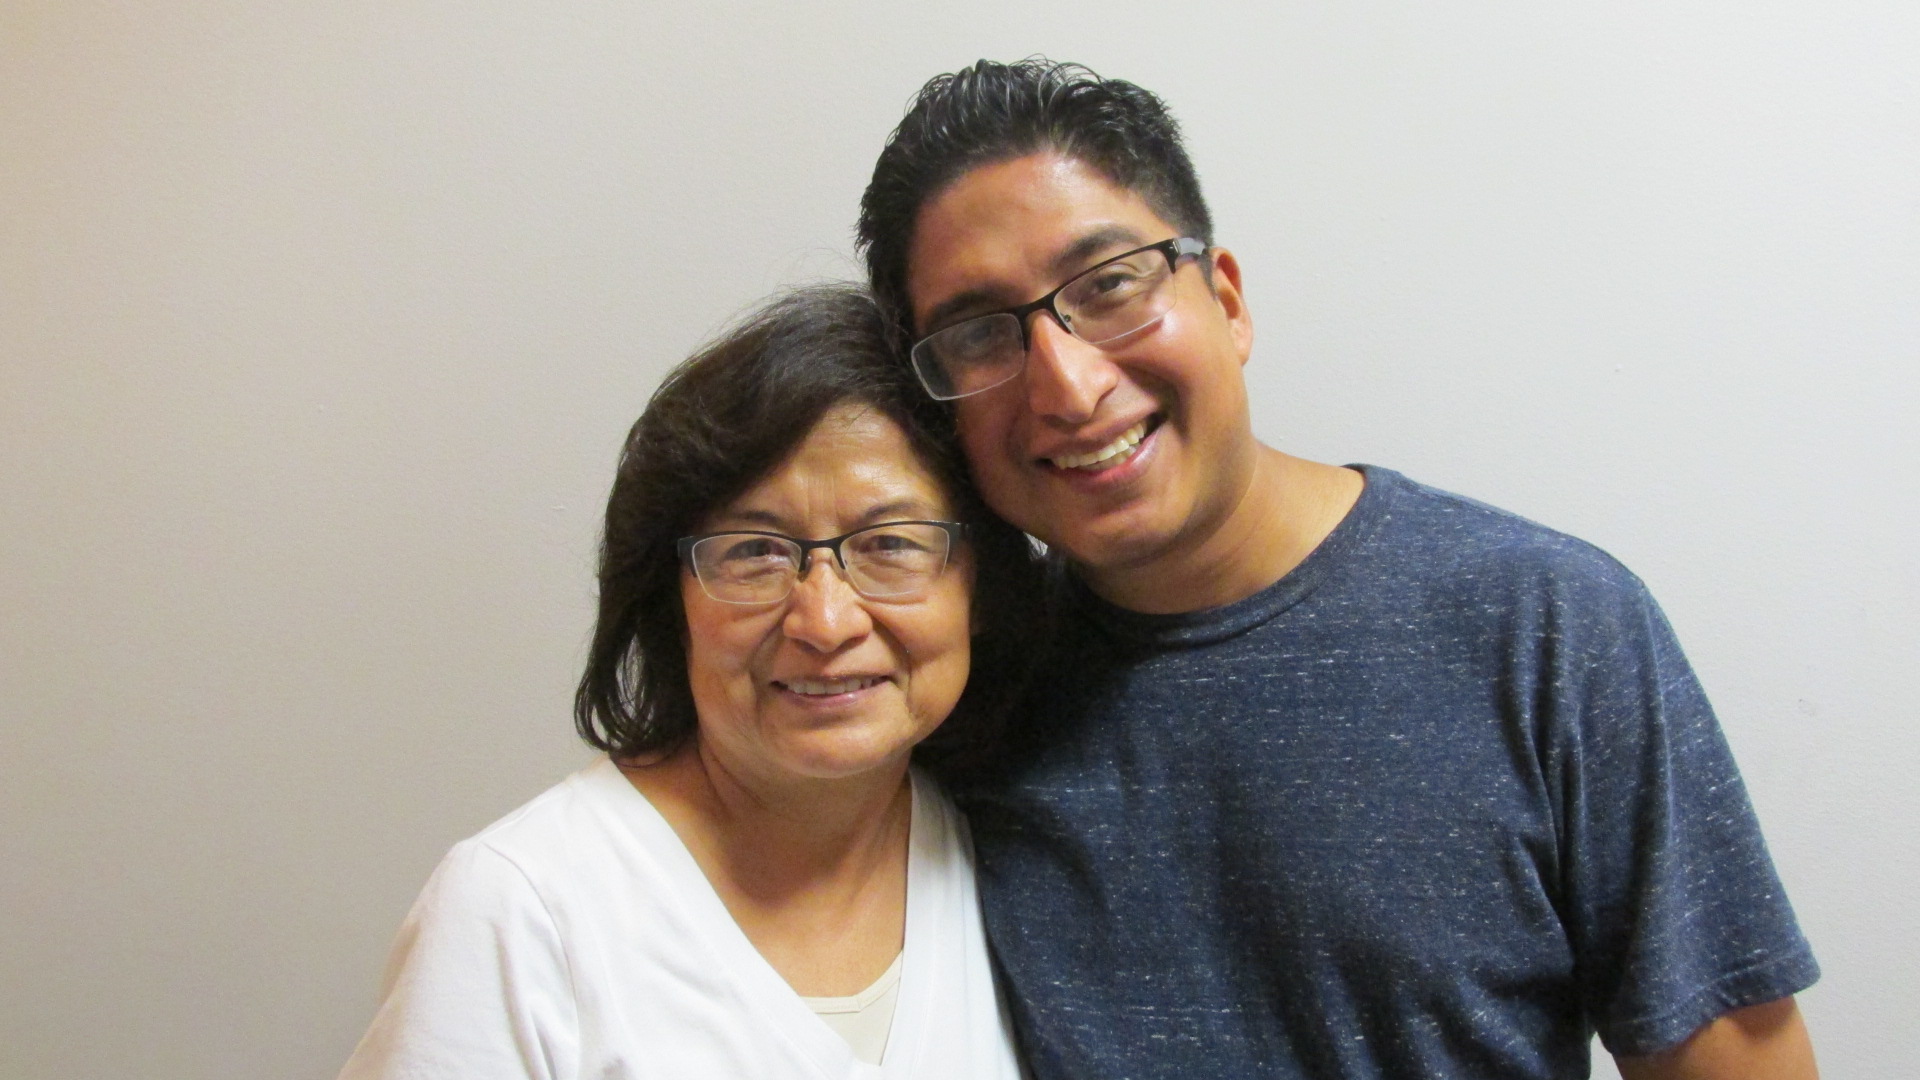 Mario Salinas and his mom Stella Mireles-Walters said that they both had to fight larger institutions that took a "one-size-fits-all" approach when he was growing up with cerebral palsy in school.